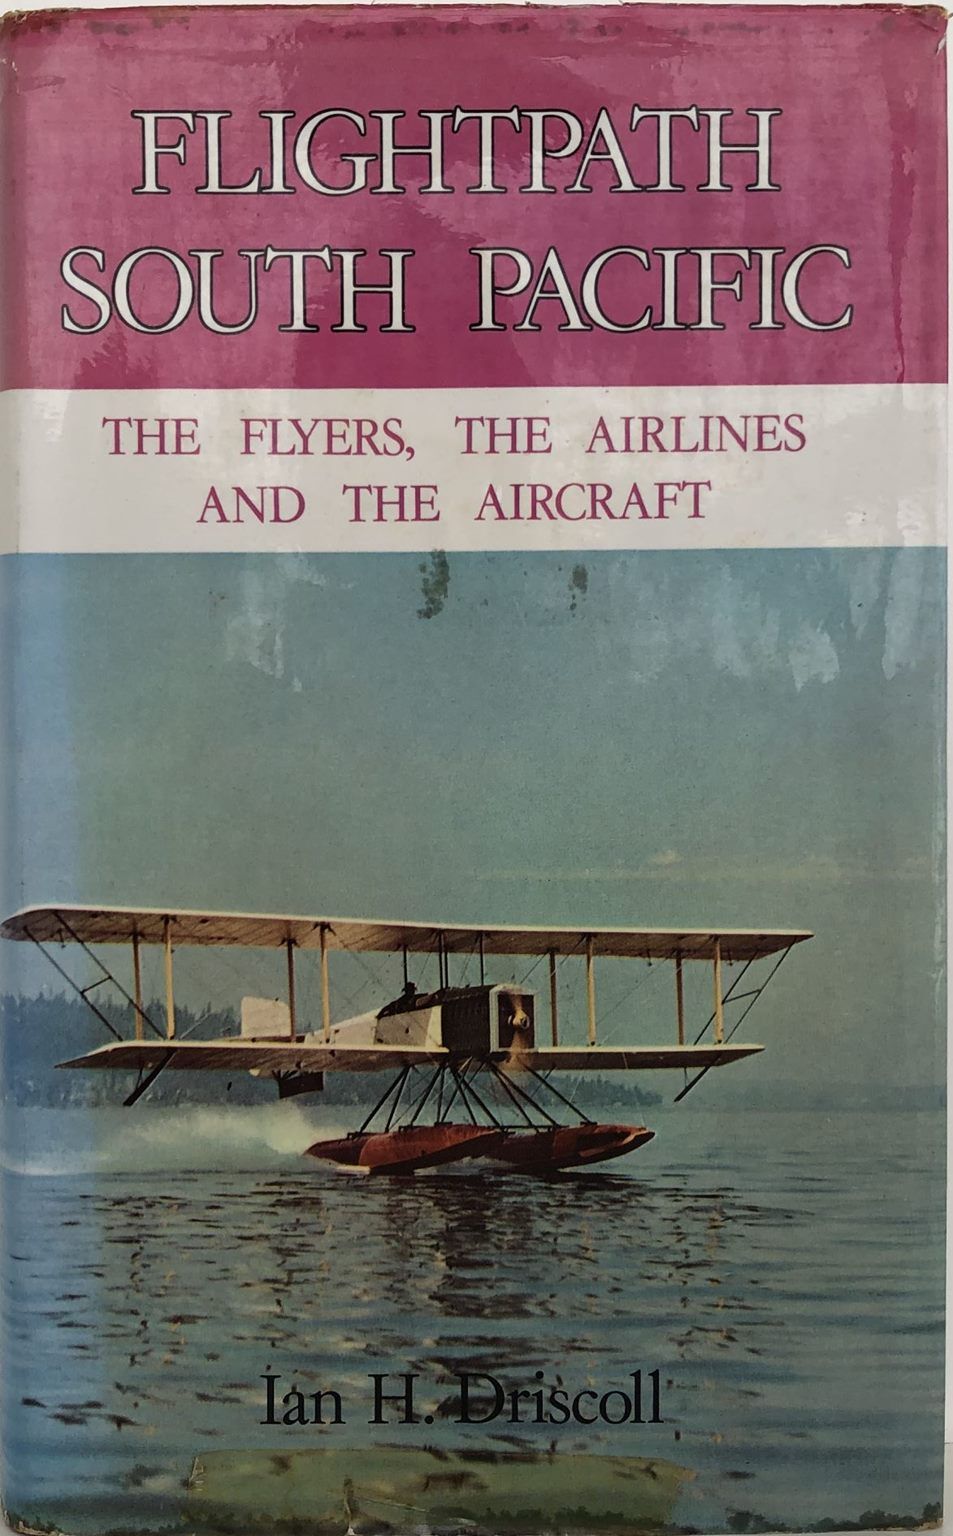 FLIGHTPATH SOUTH PACIFIC: The Flyers, The Airlines and The Aircraft